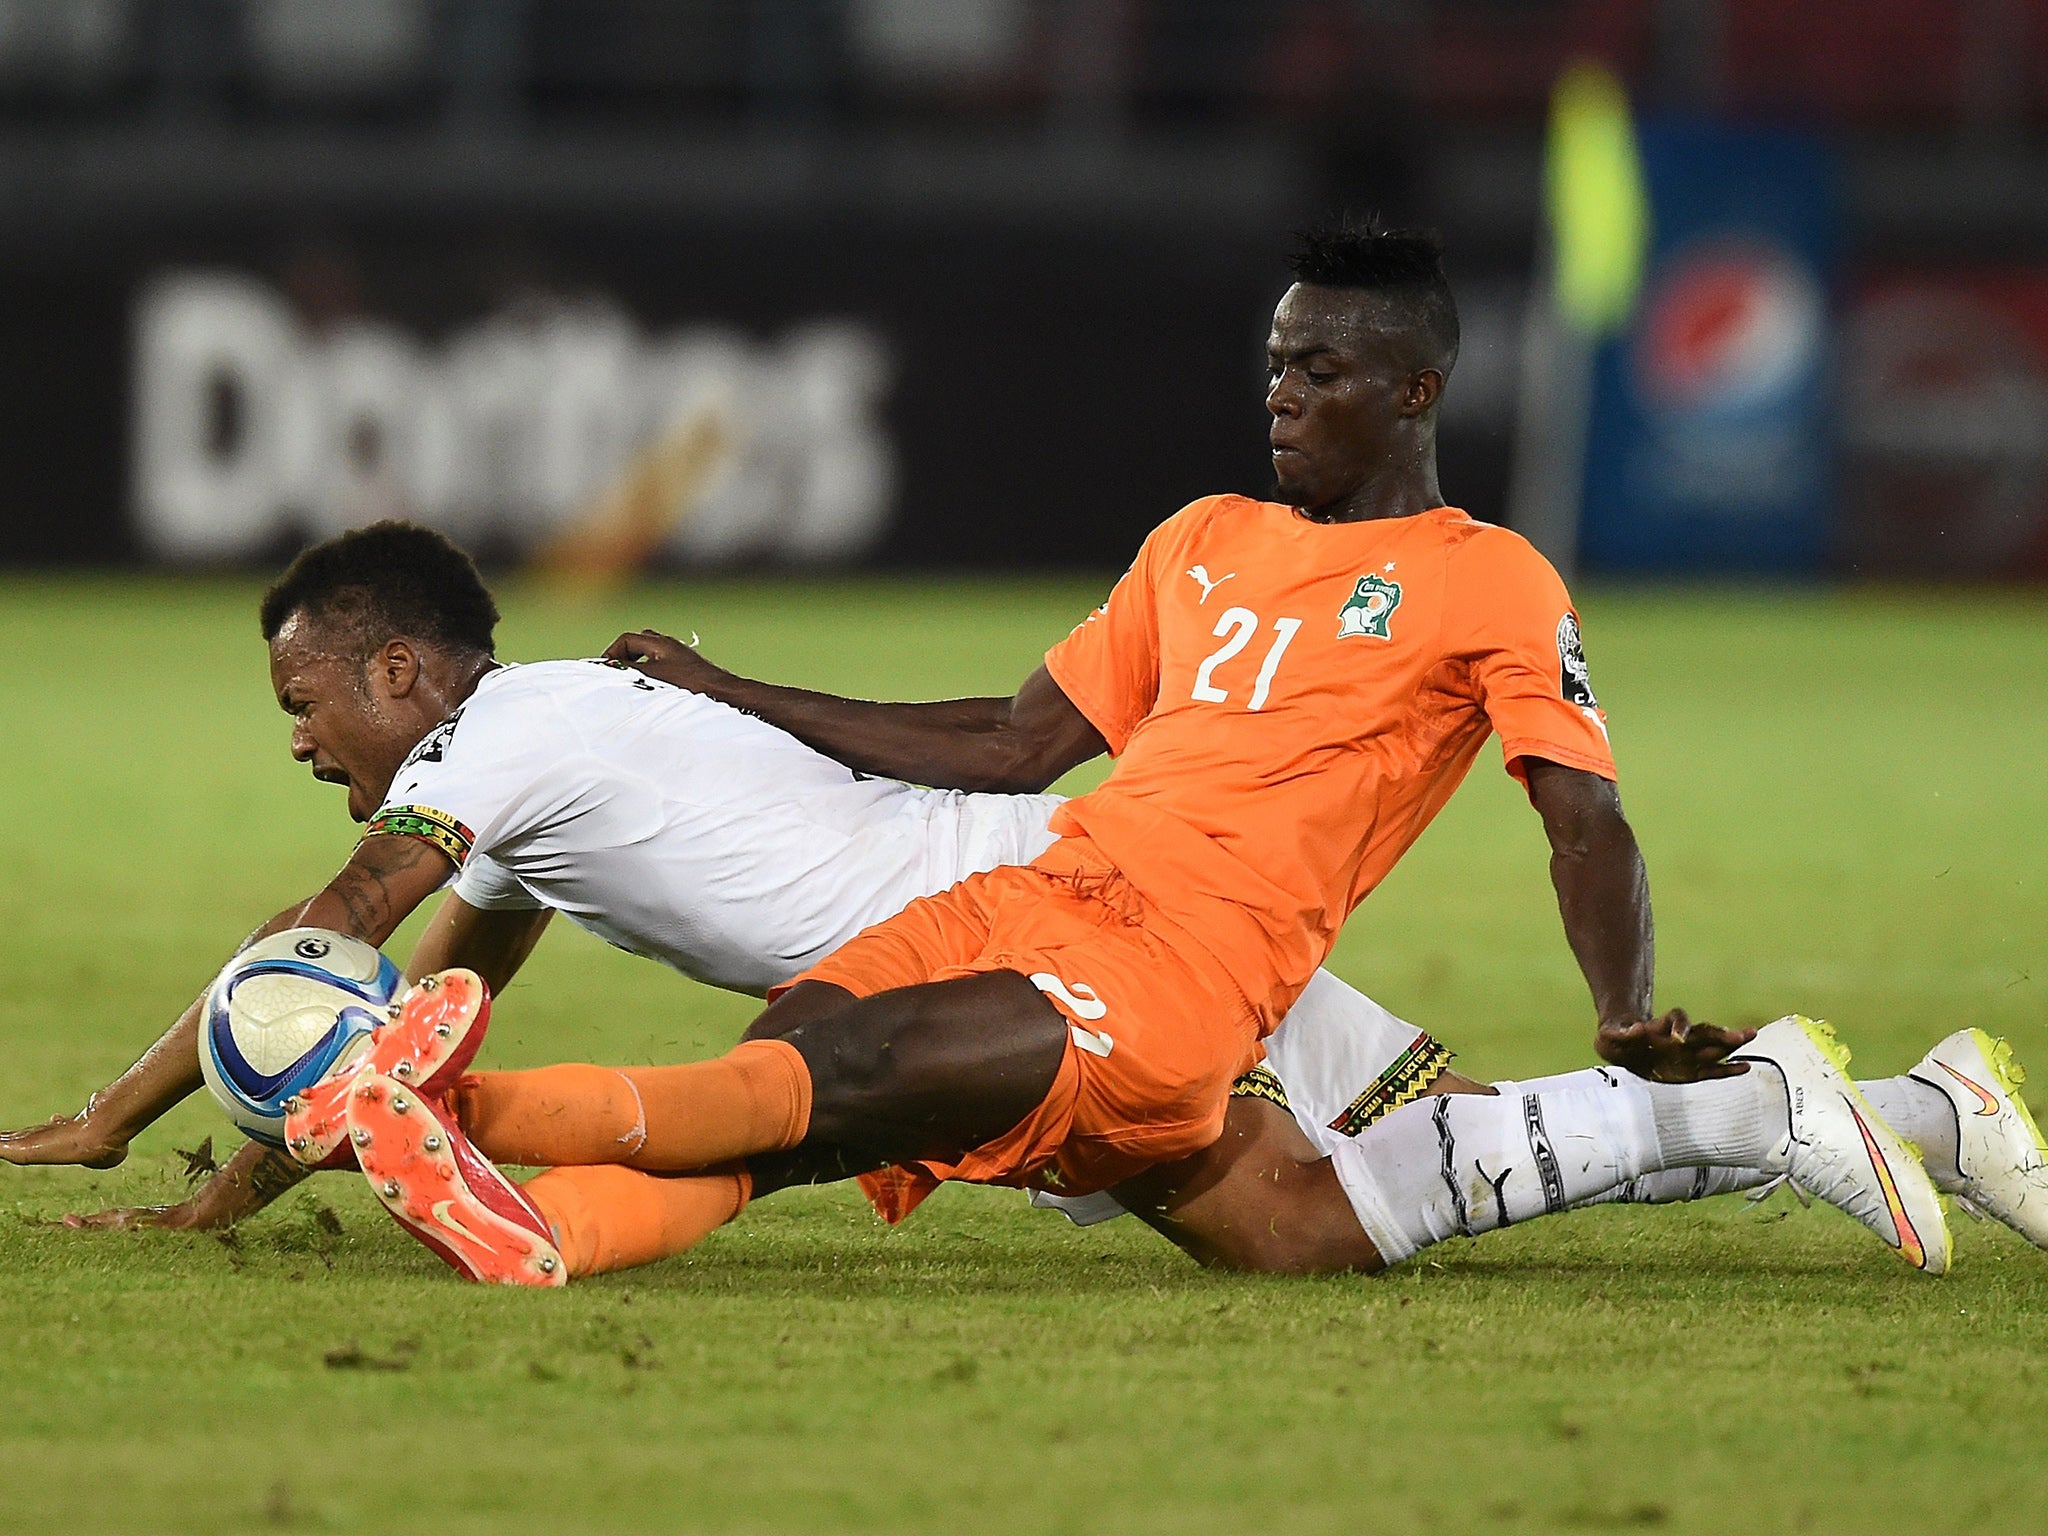 Bailly fells Ghana's Jordan Ayew during the 2015 Africa Cup of Nations final